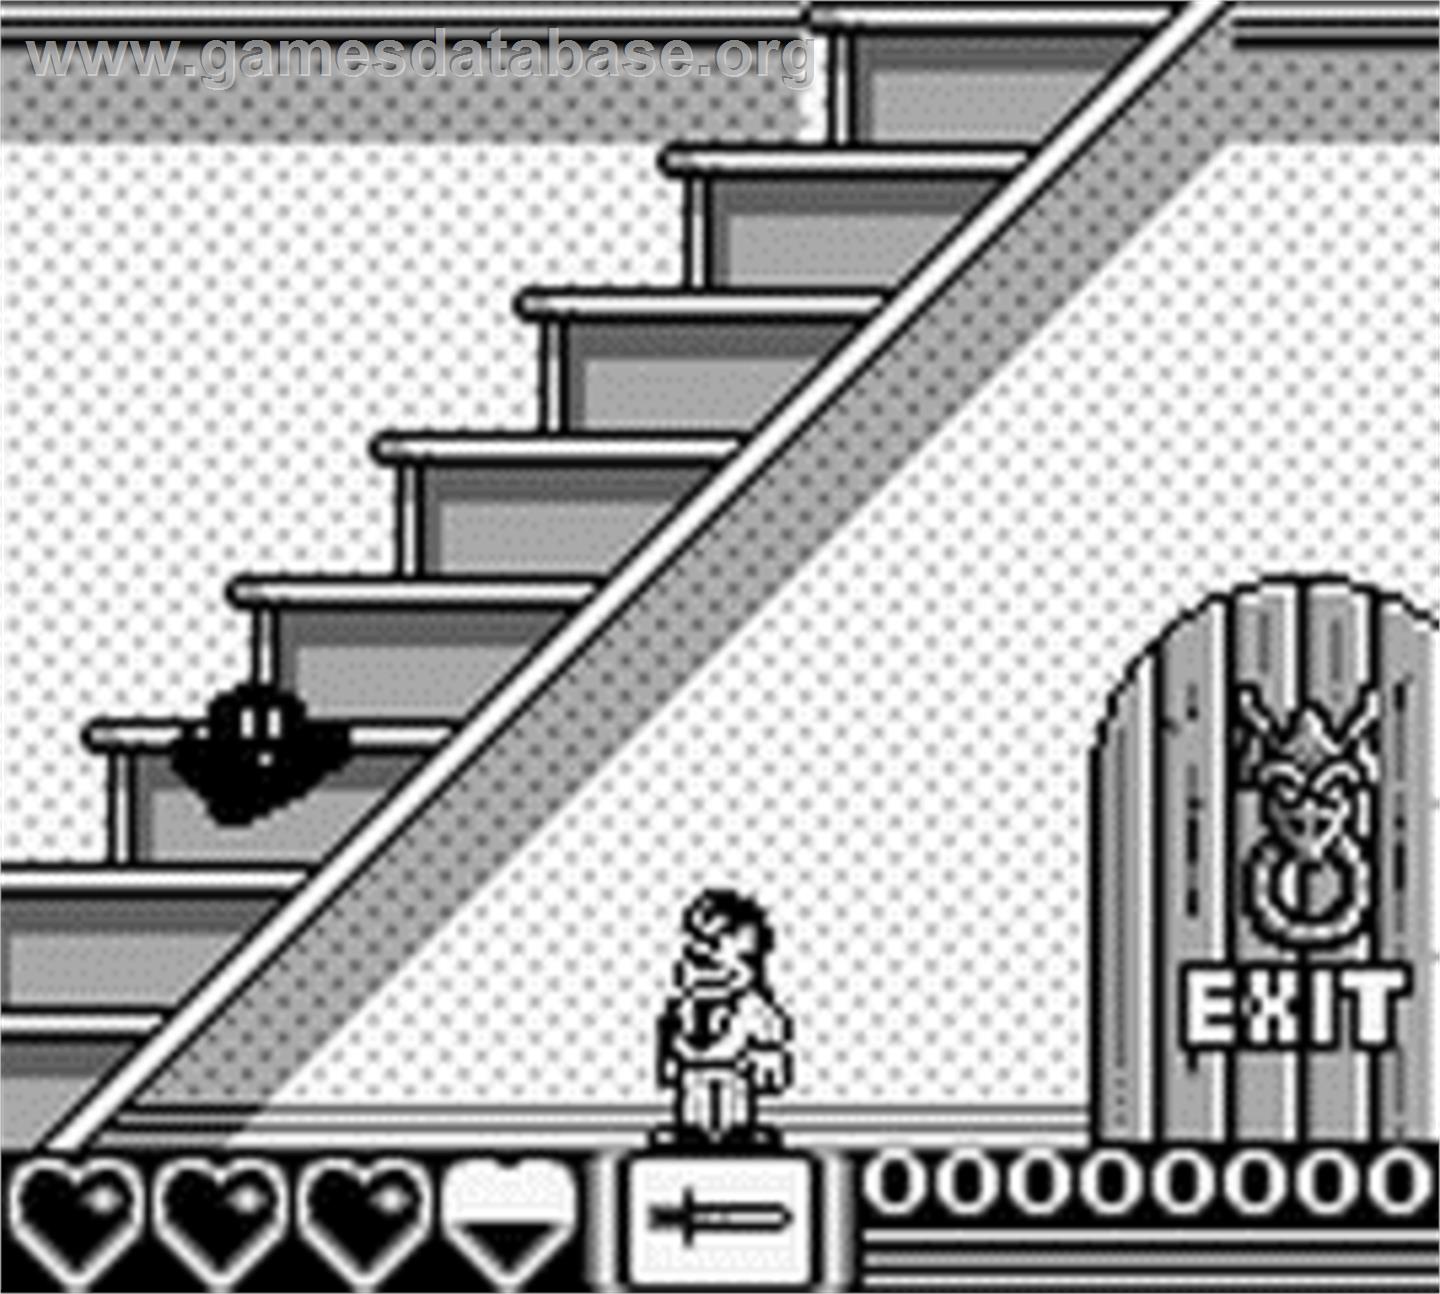 Addams Family, The - Nintendo Game Boy - Artwork - In Game